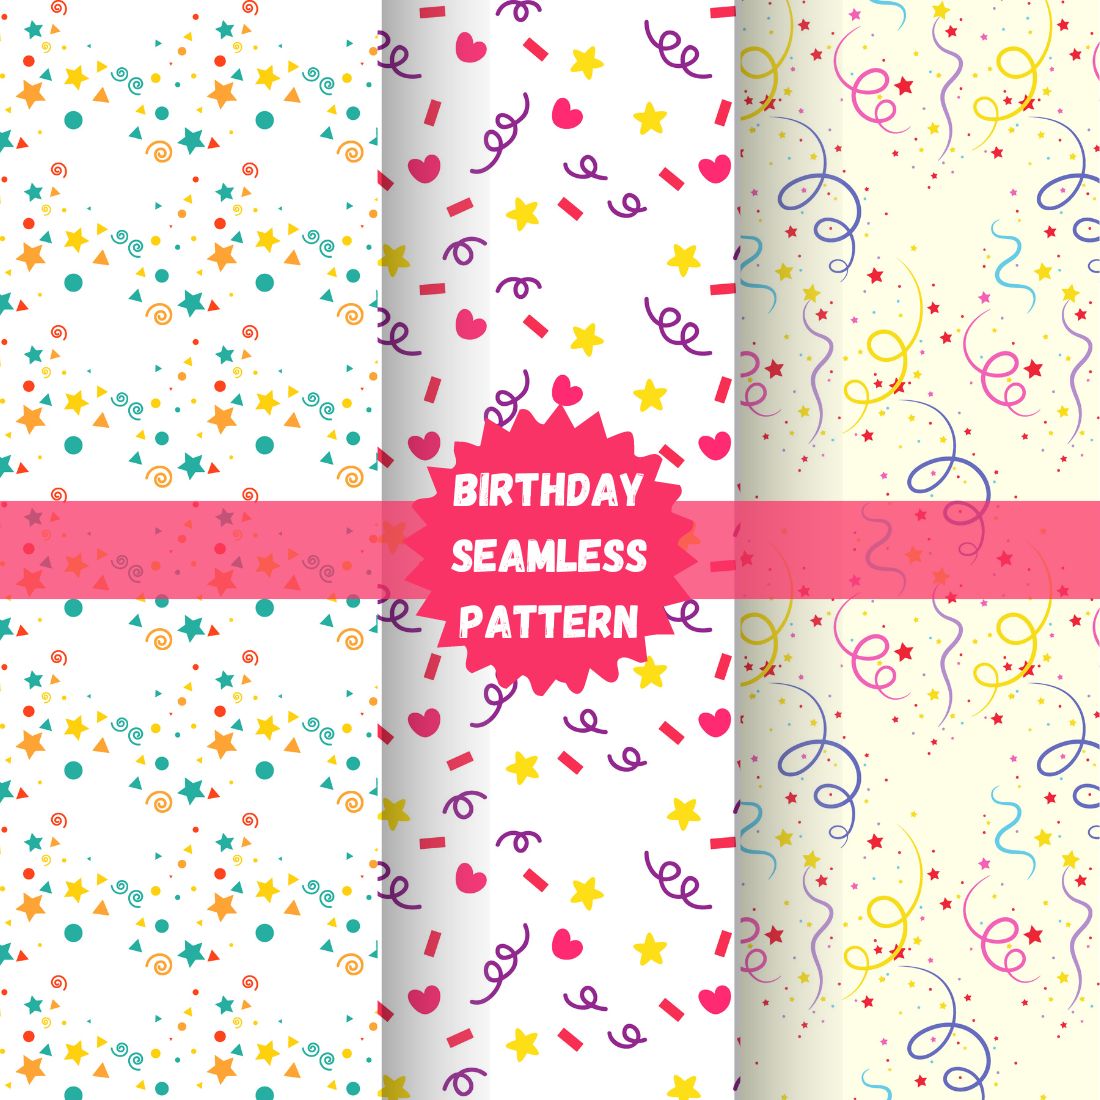 Birthday seamless pattern graphic cover image.